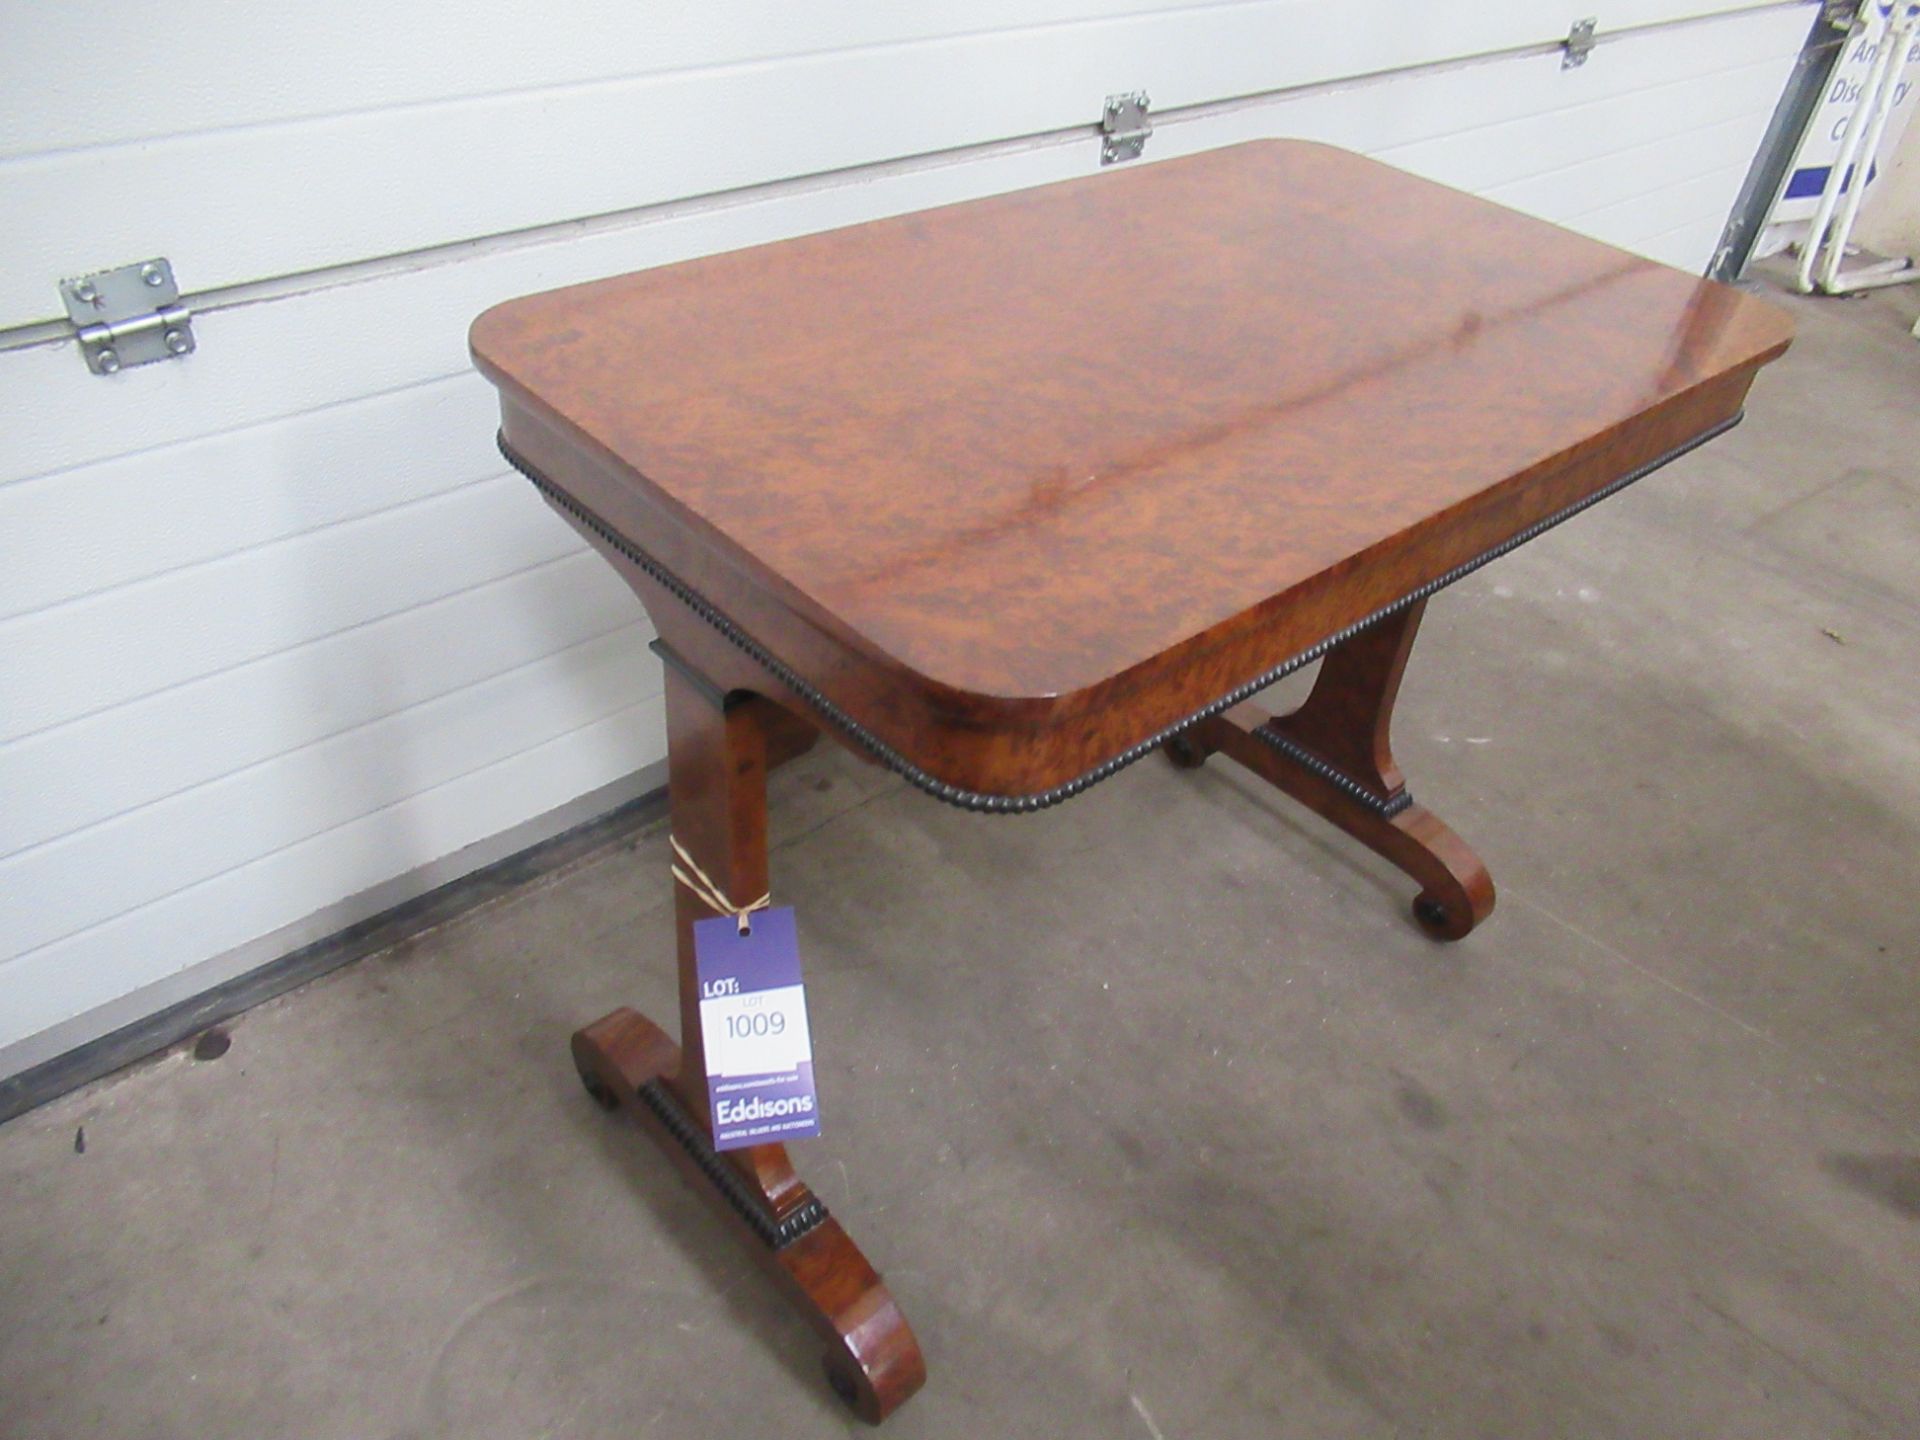 Burr Walnut Hallway Table with Beading Detail on Castor Wheels - Image 5 of 5